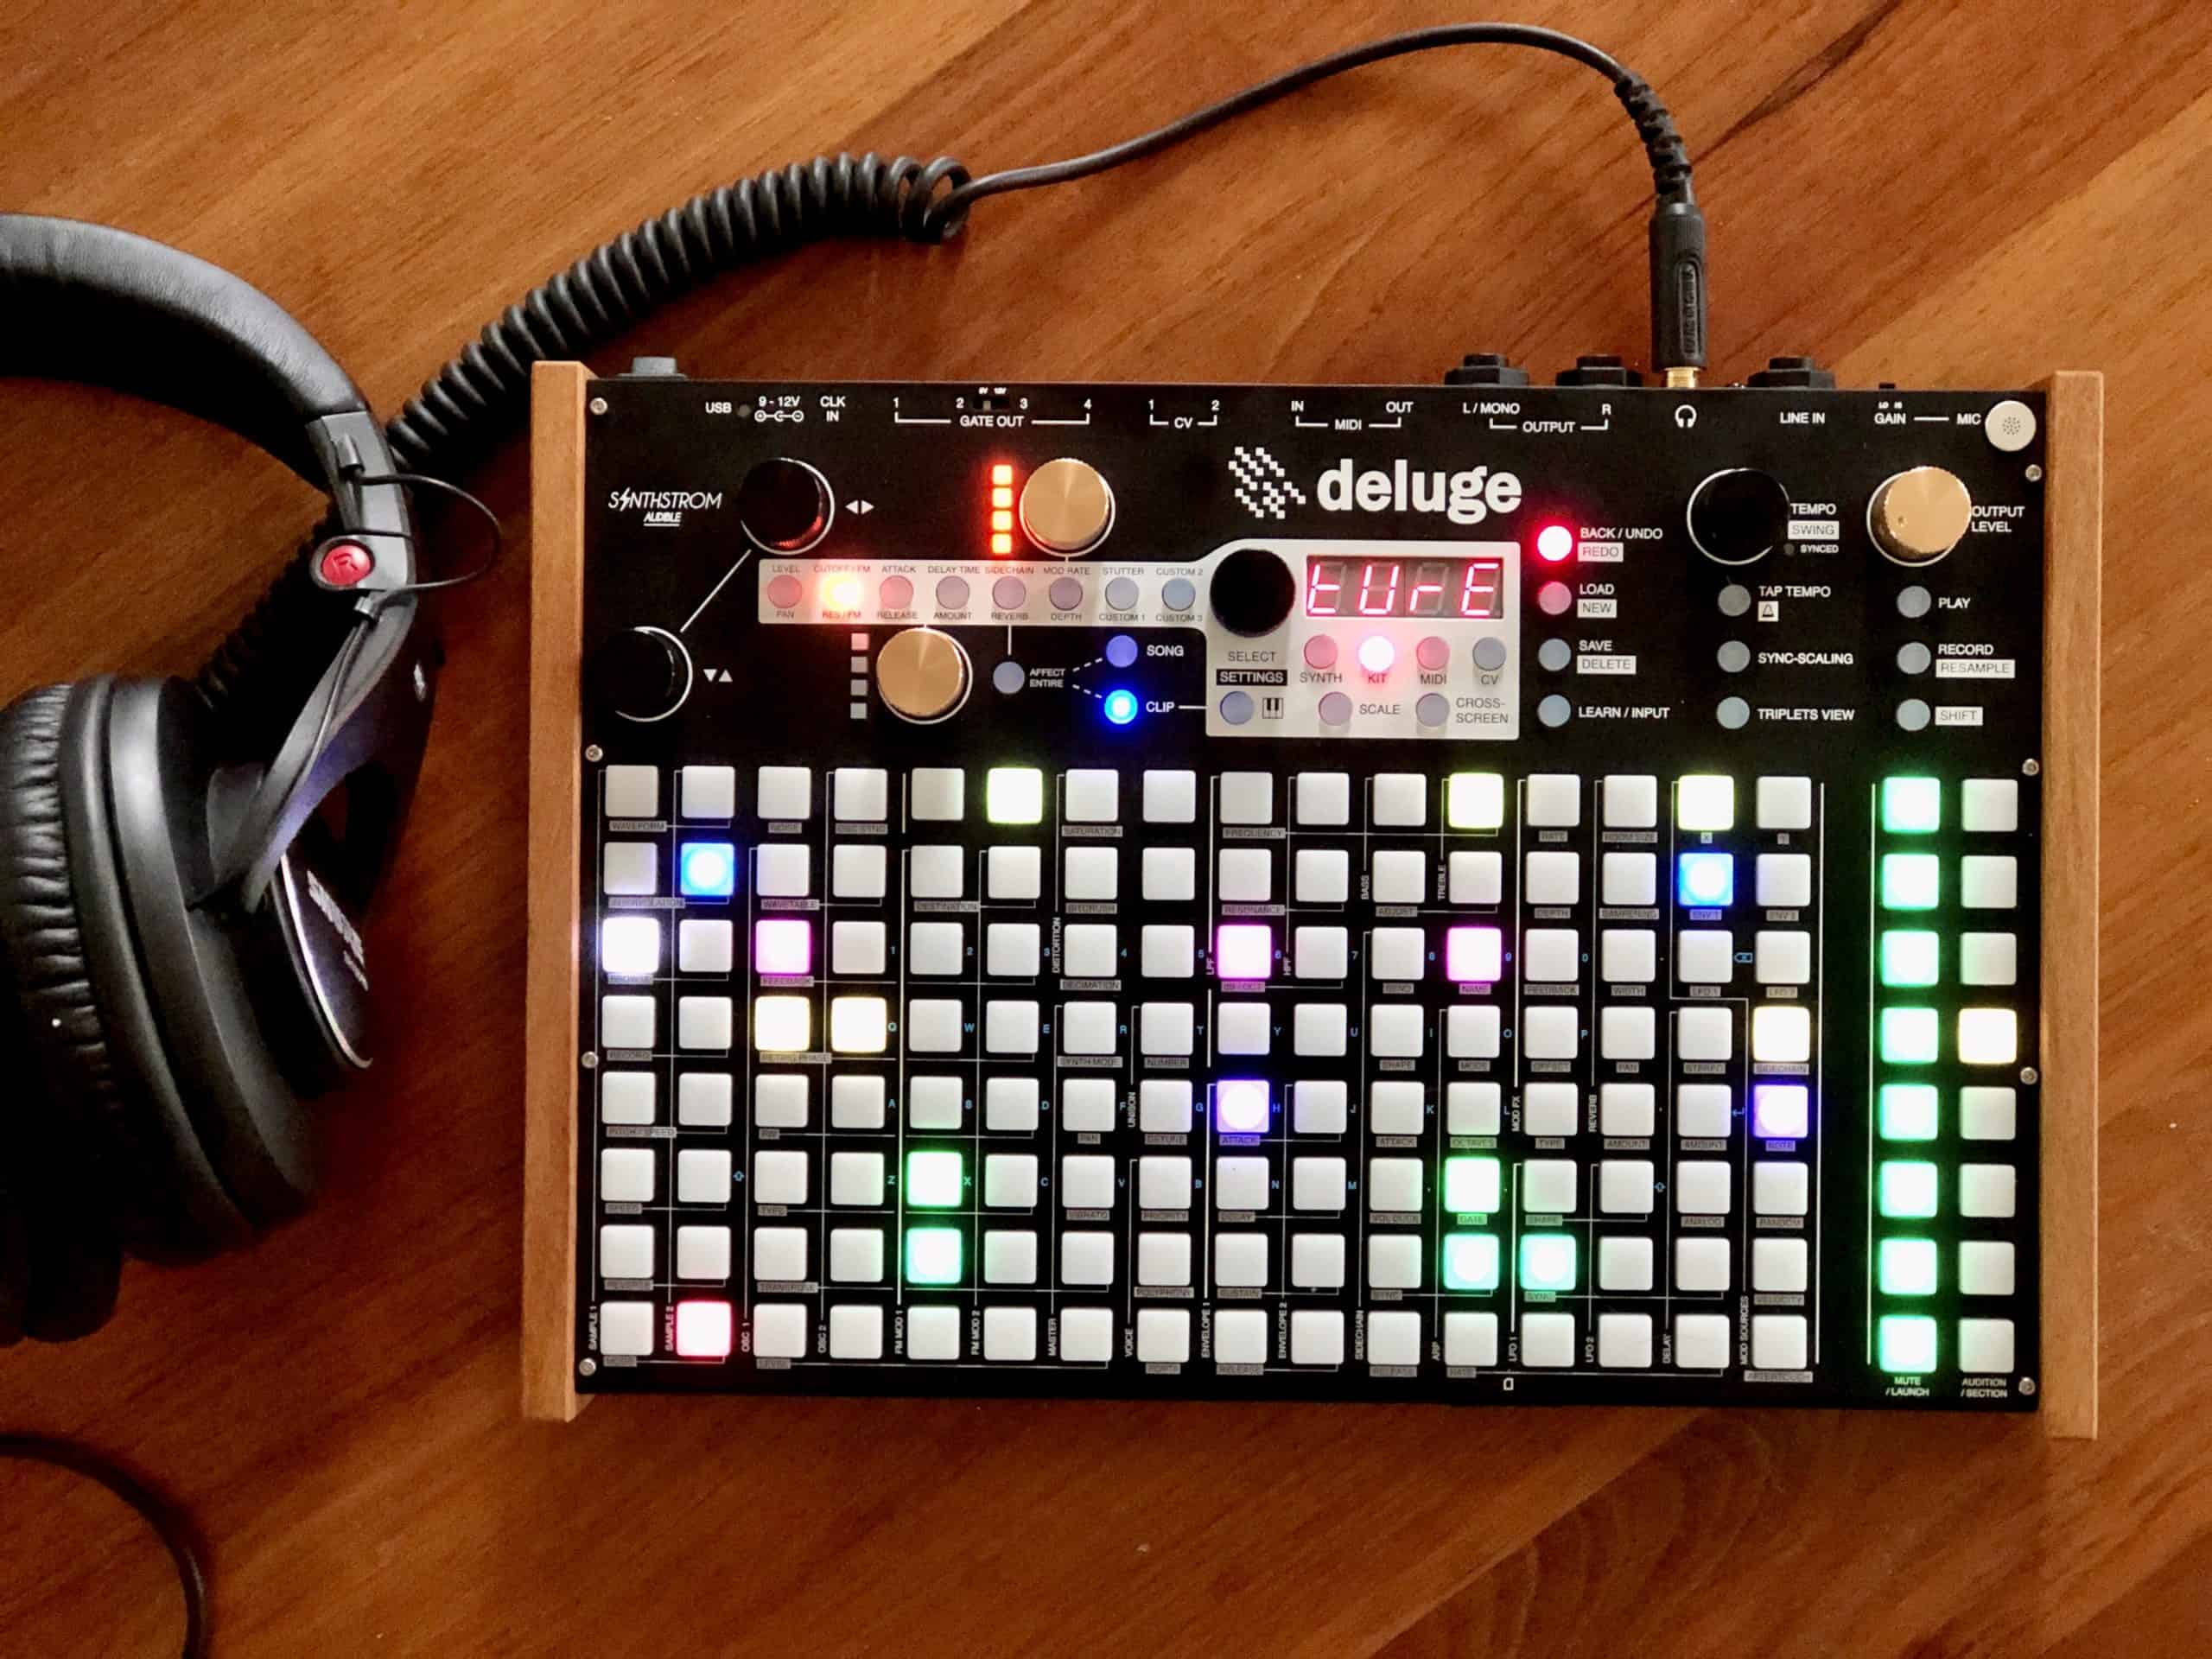 Synthstrom’s Deluge 3.1.1 Update